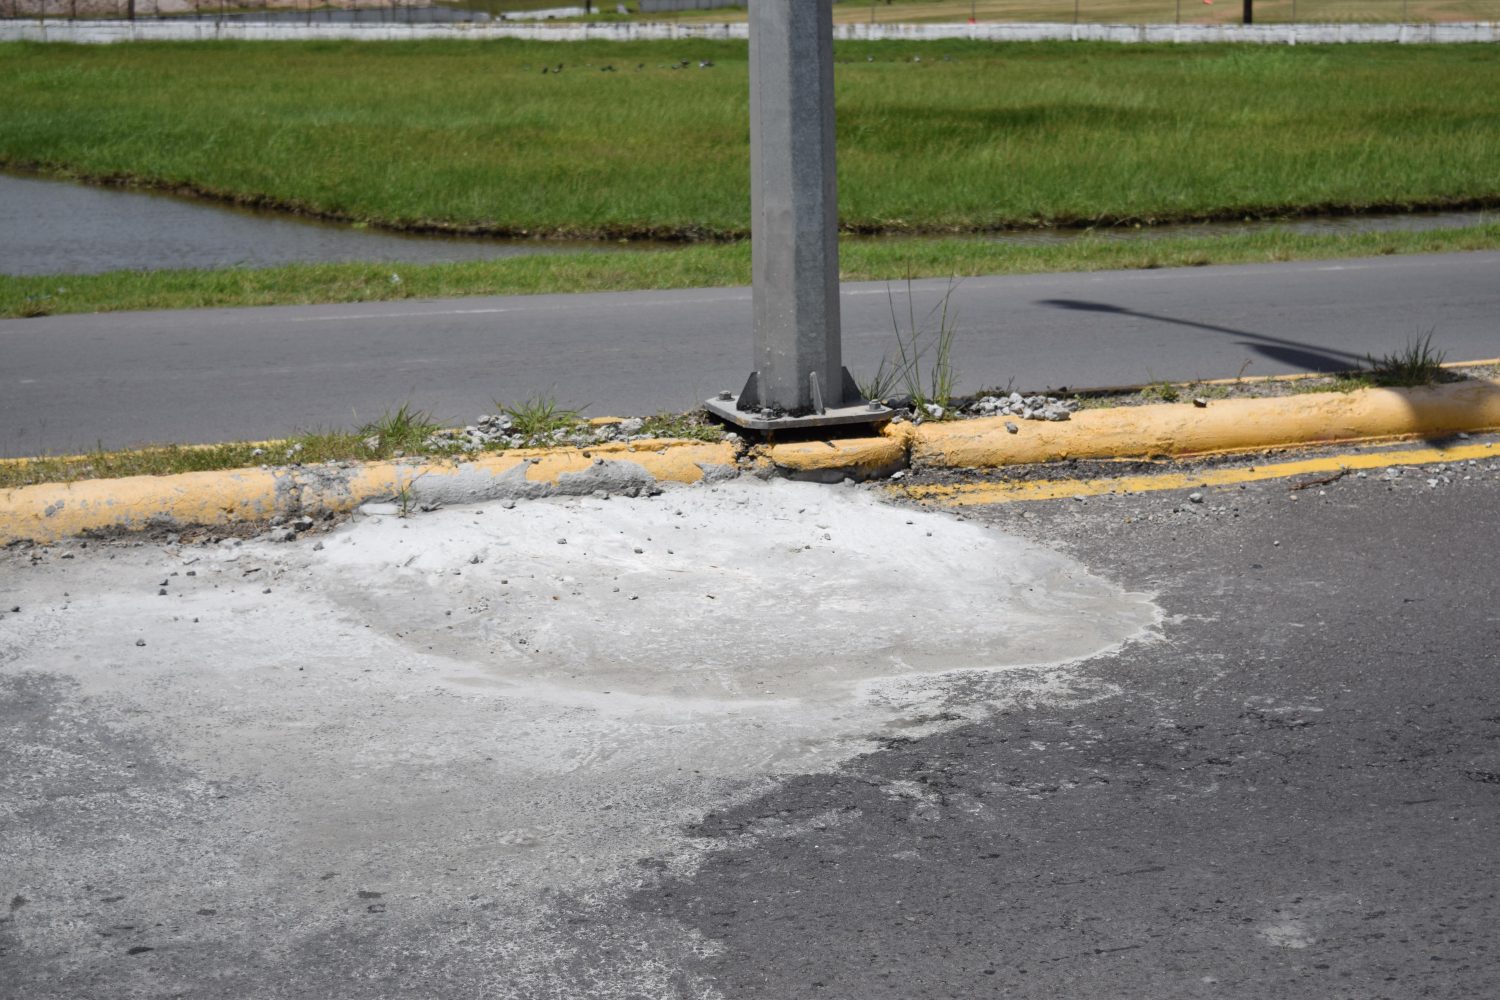 One of the potholes along Carifesta Avenue which was recently filled with concrete. (MPI photo)